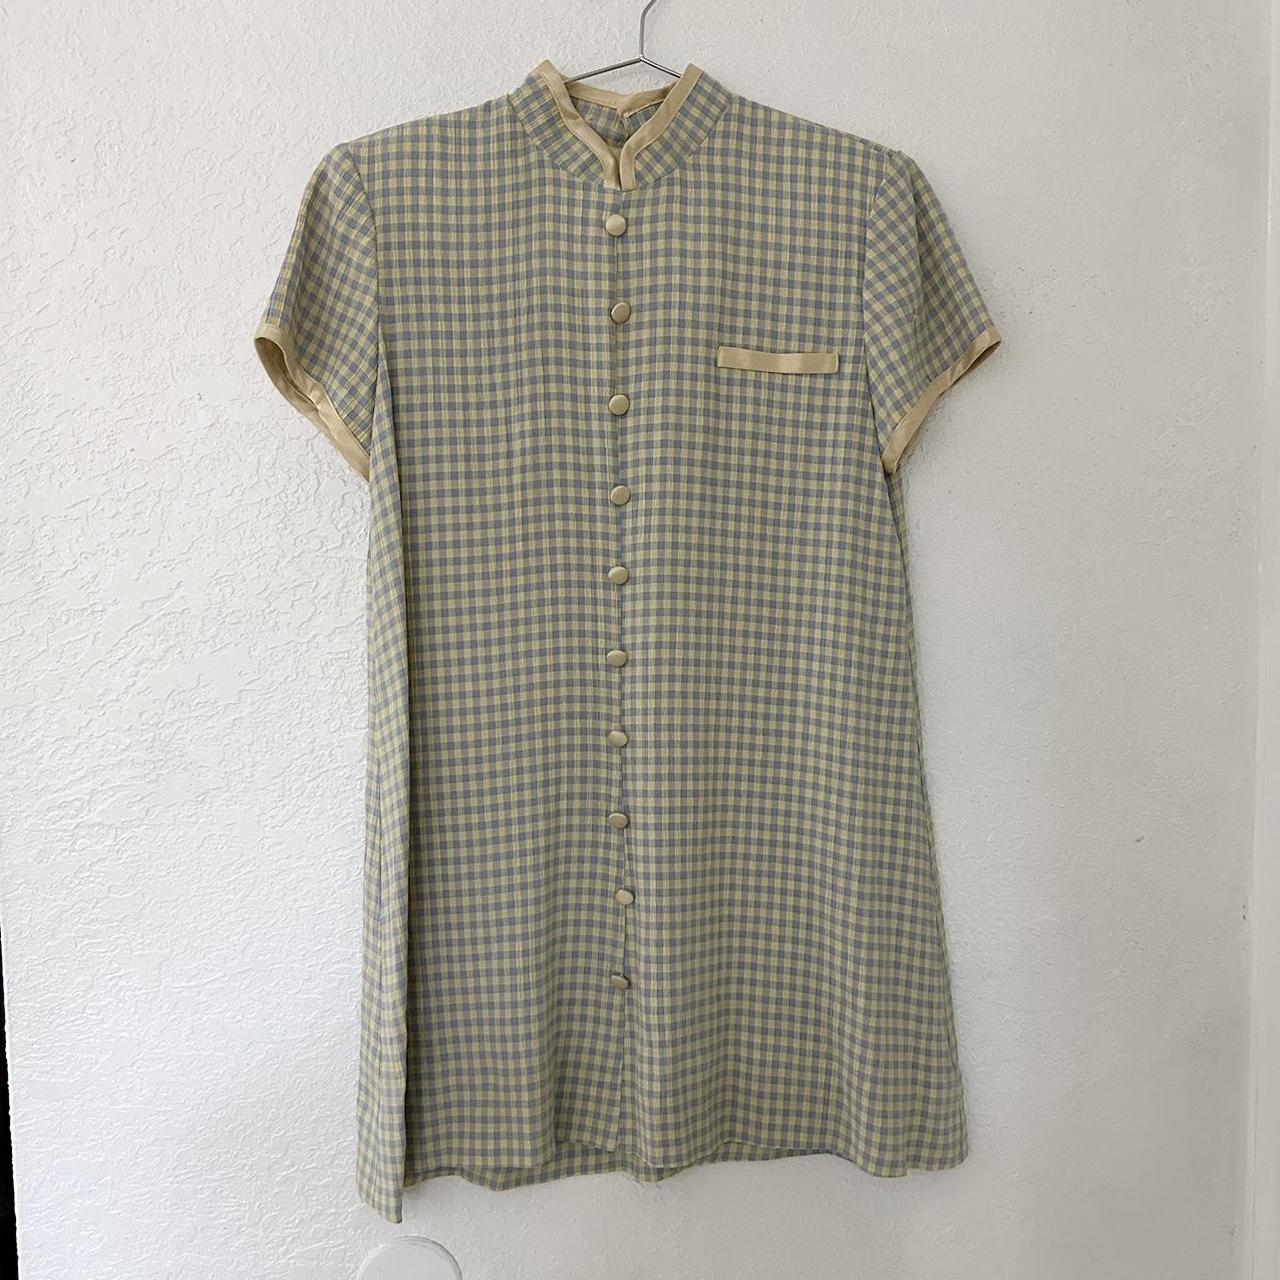 item listed by pacavintage